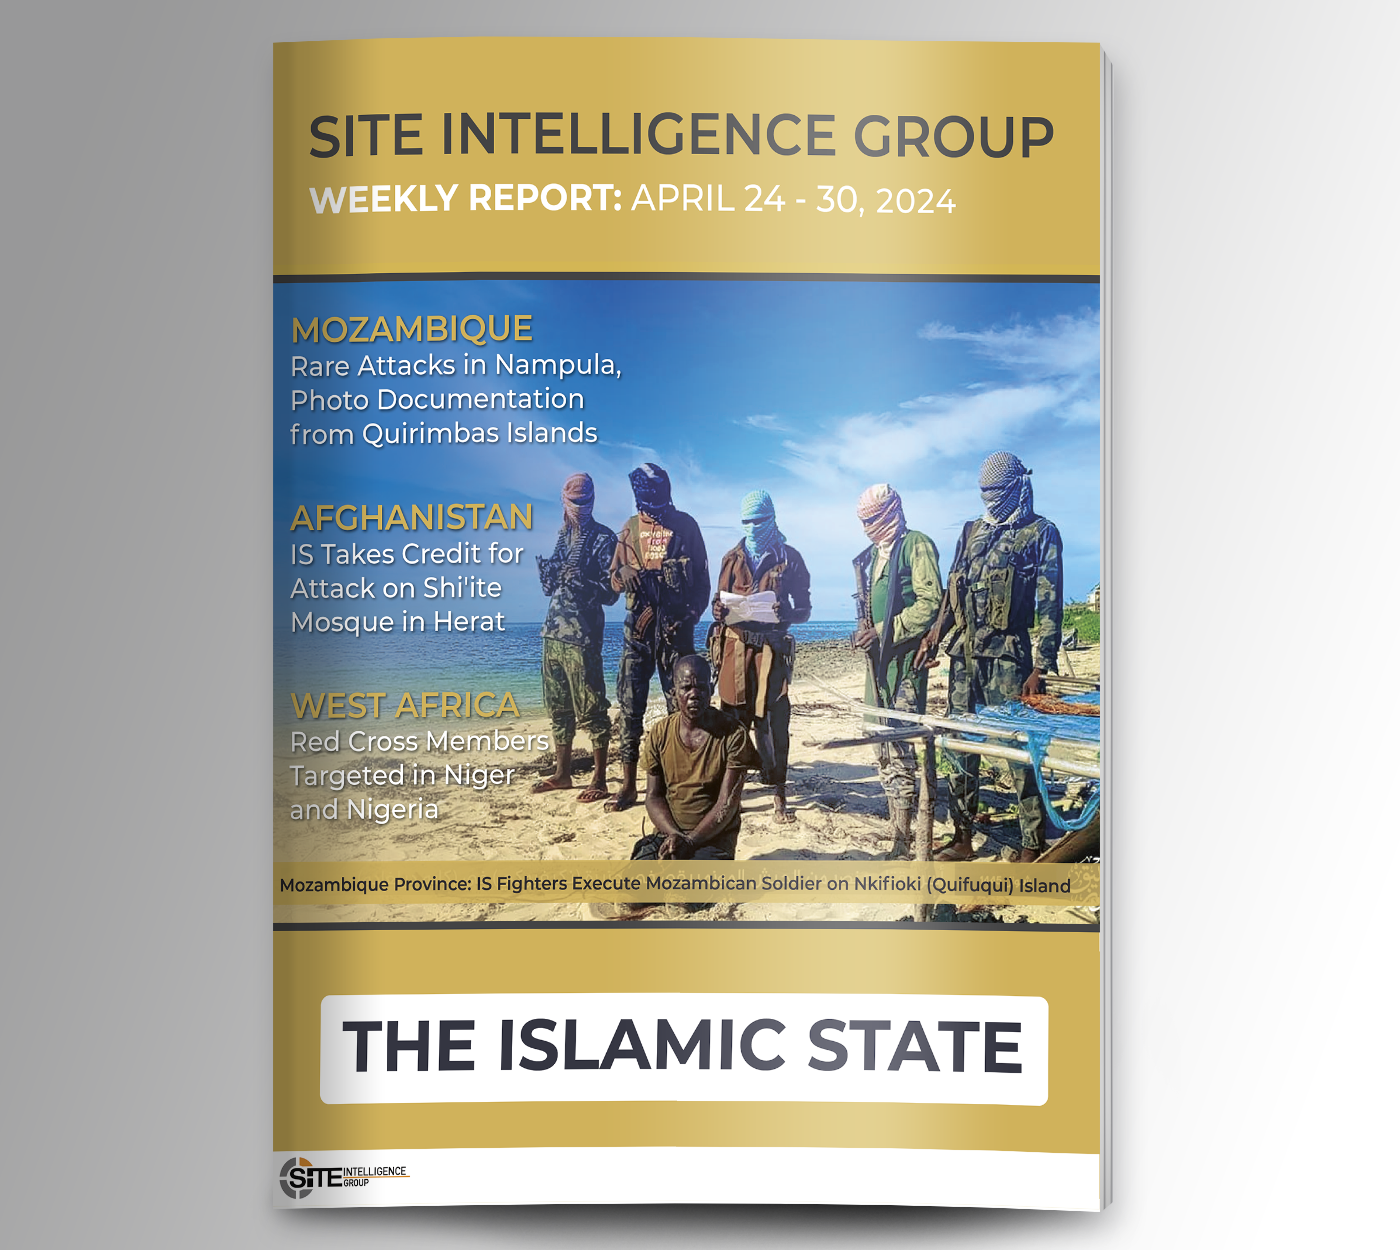 Weekly inSITE on the Islamic State for April 24-30, 2024